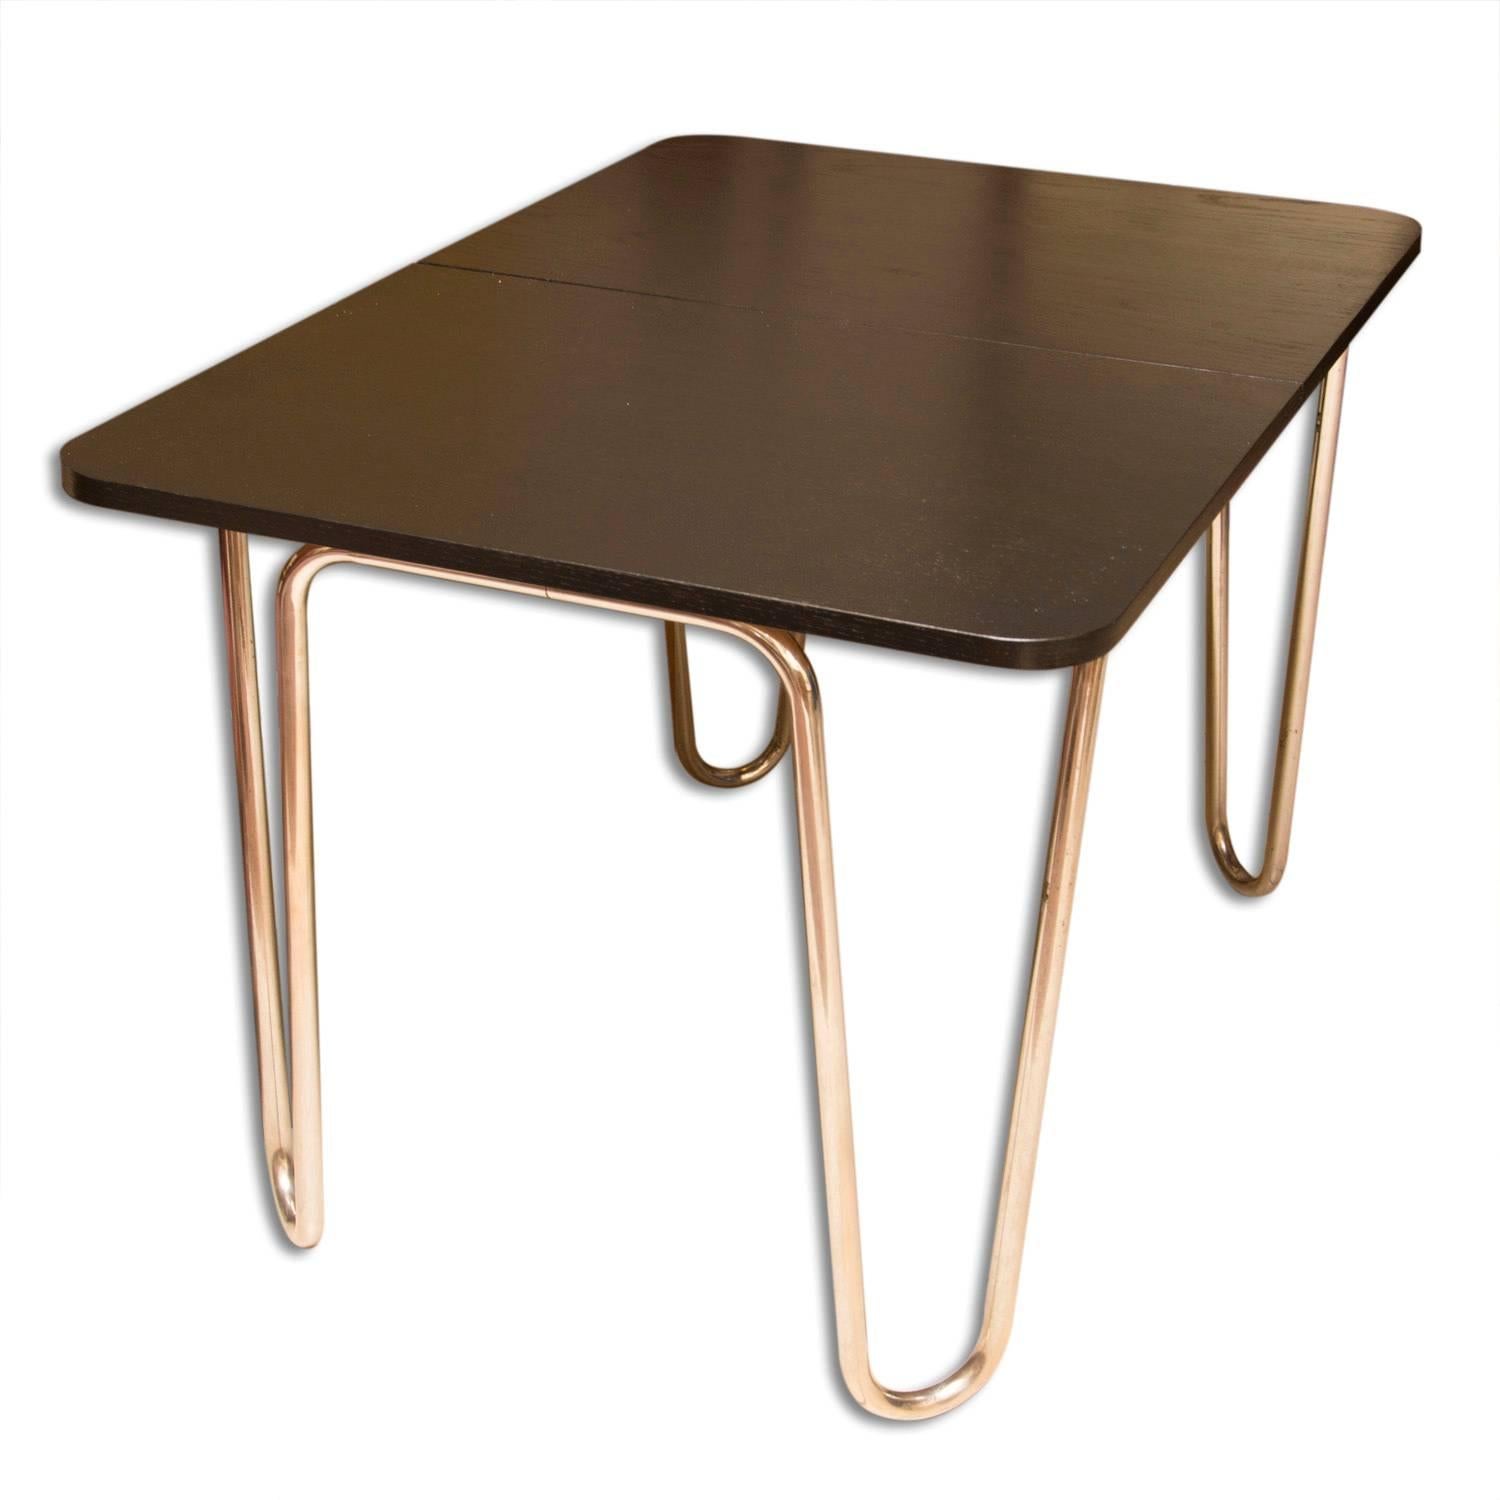 This folding dining table was made in Bohemia in the 1930s by the famous company Robert Slezak. The table features a chrome-plated metal base and dark stained oak top. Chrome structure is in very good Vintage condition. Table length after unfolding